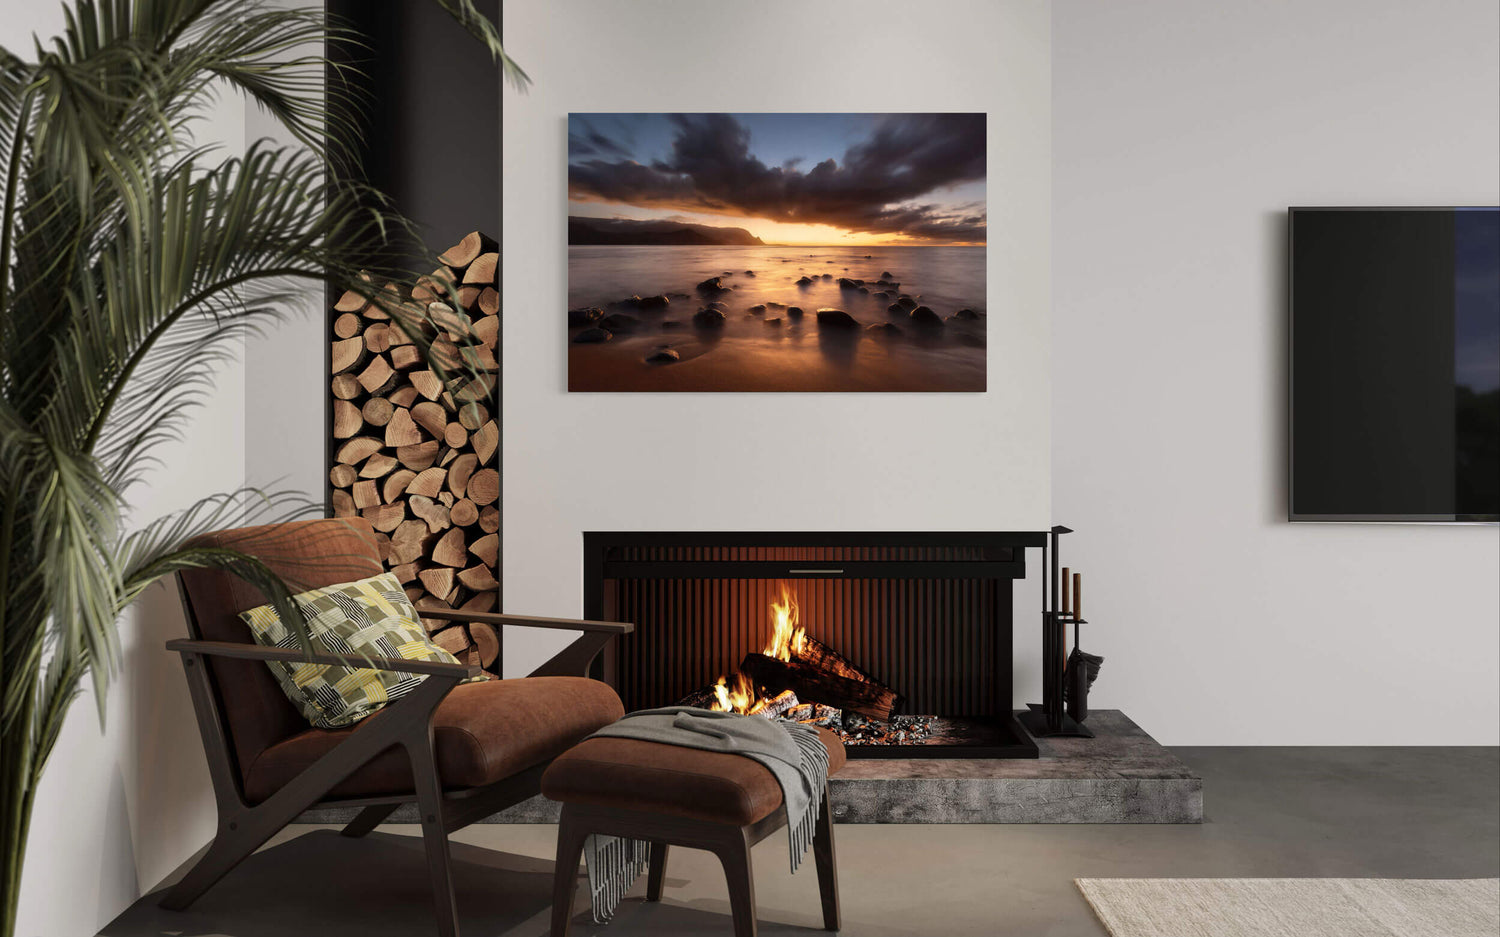 A piece of Kauai art showing a sunset picture of Hanalei Bay from Puu Poa Beach hangs in a living room.